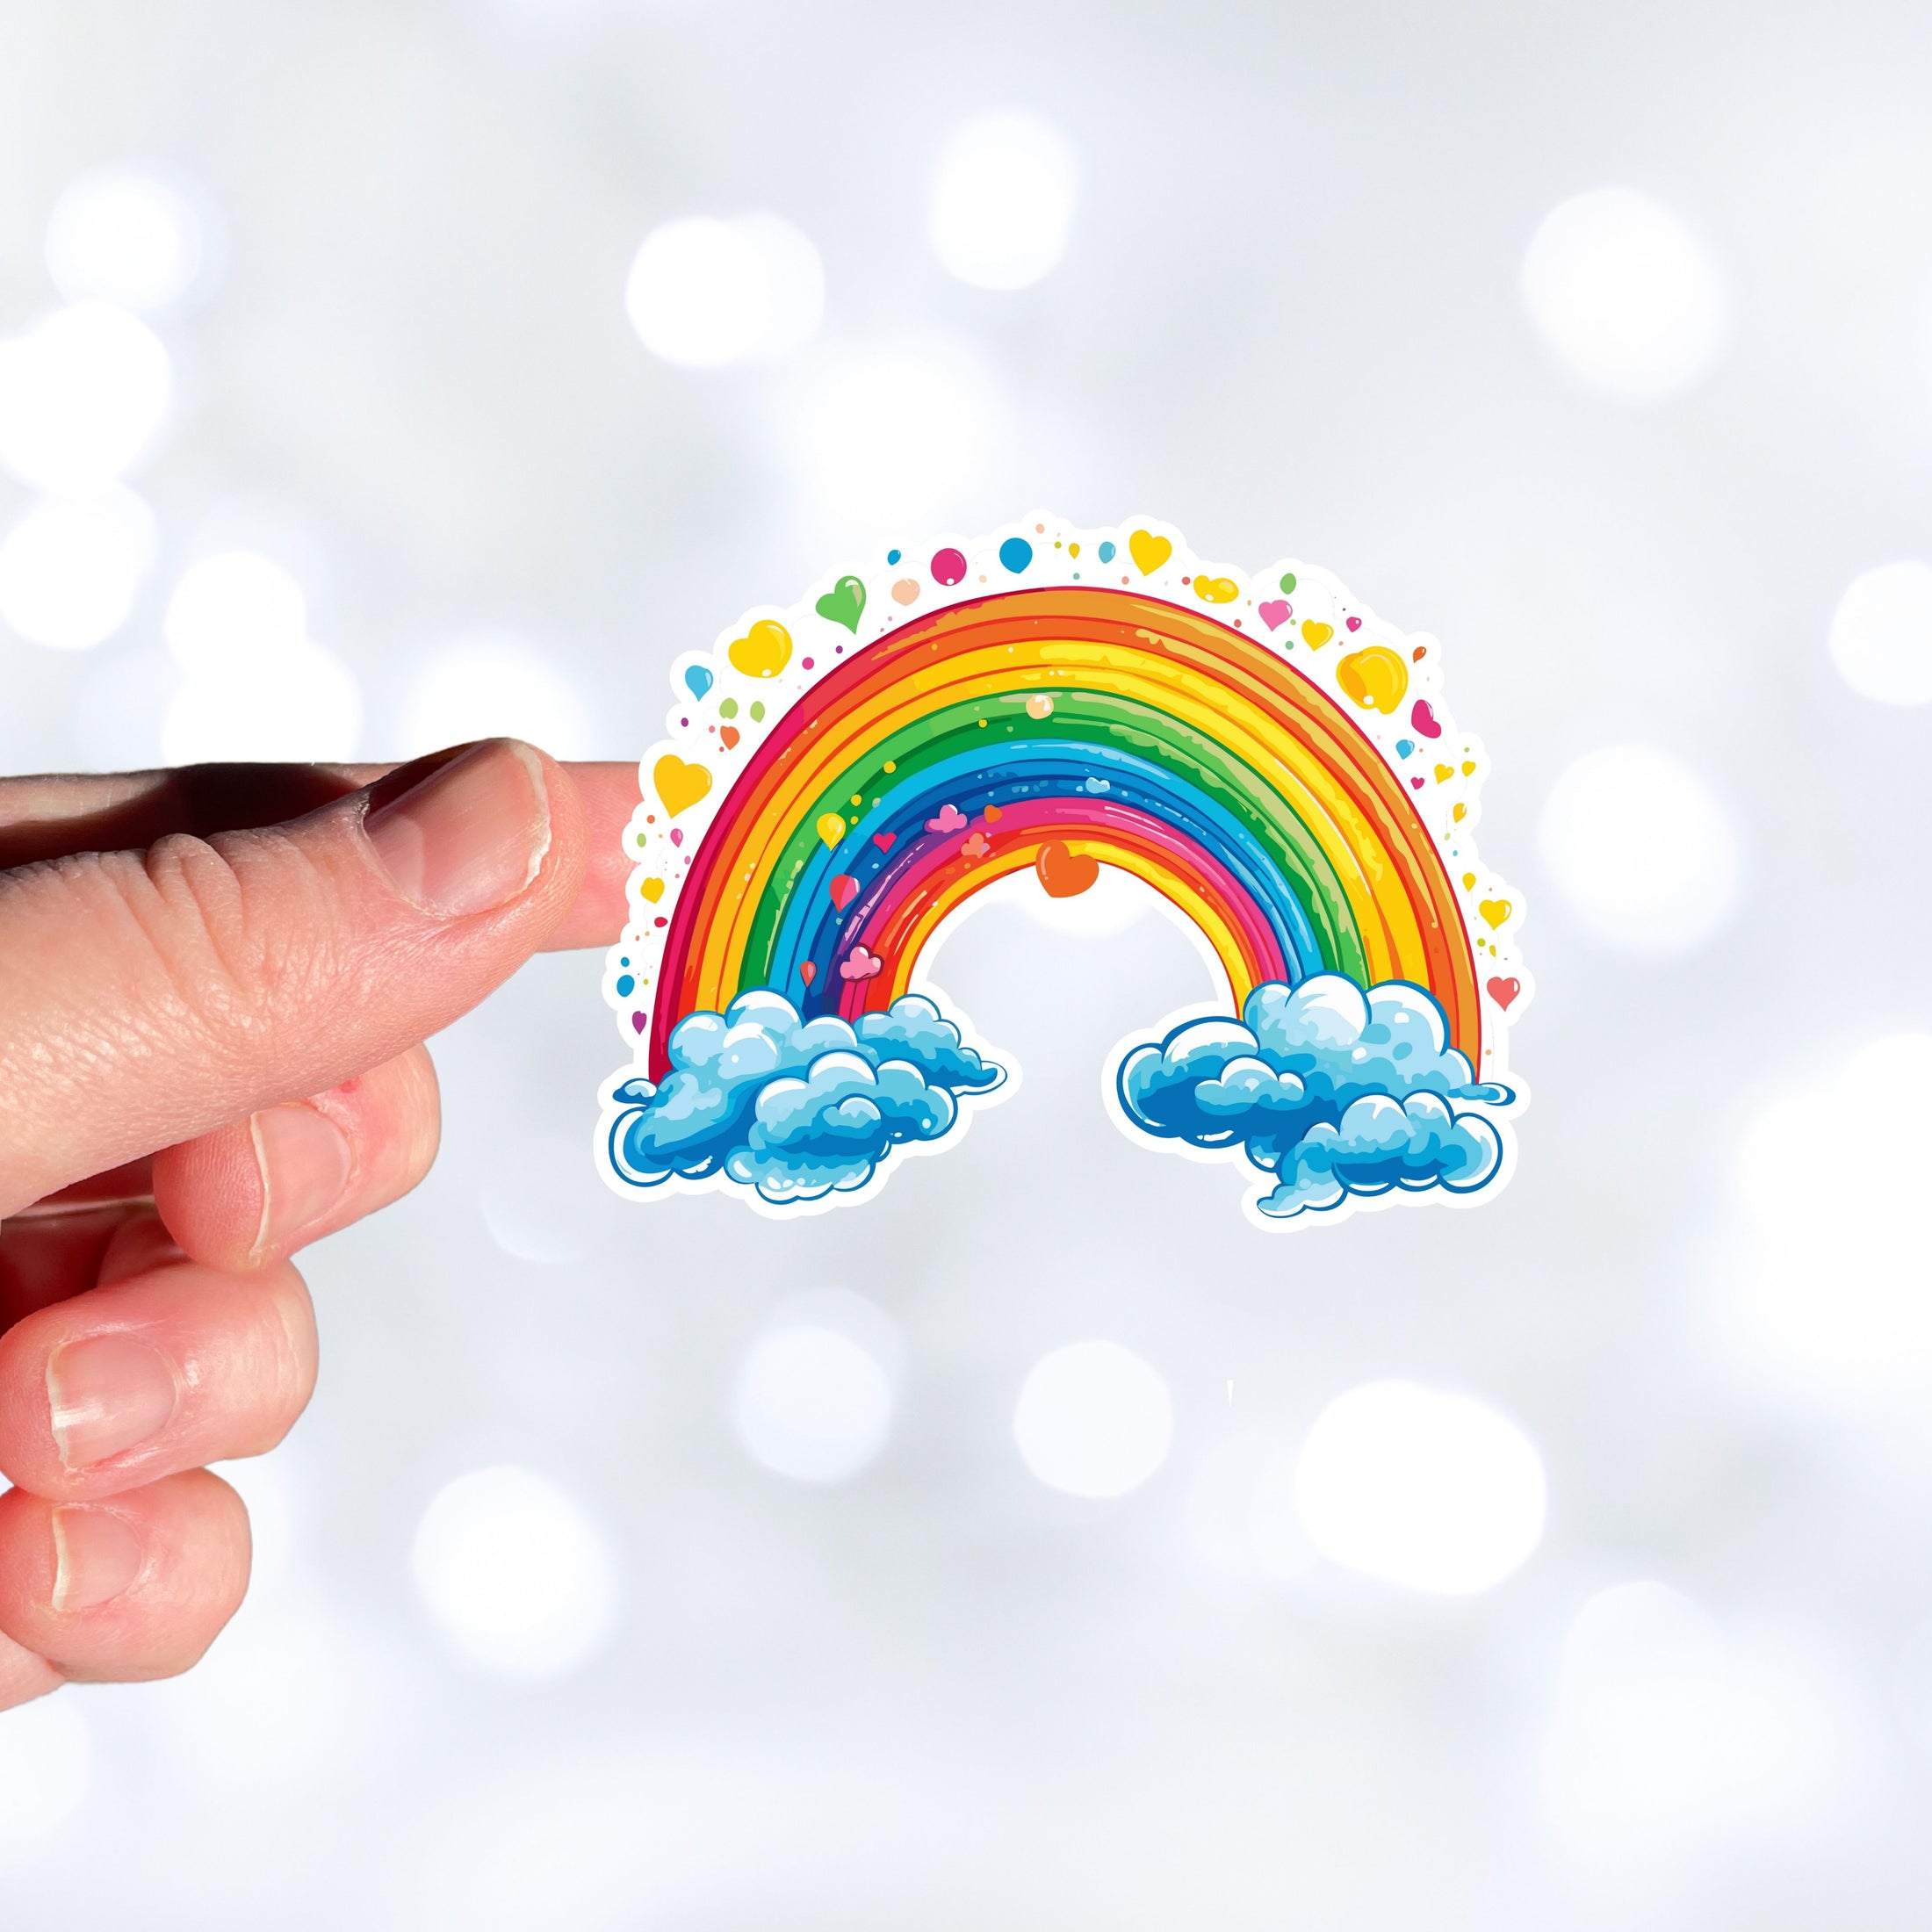 This image shows a hand holding the rainbow and hearts sticker.